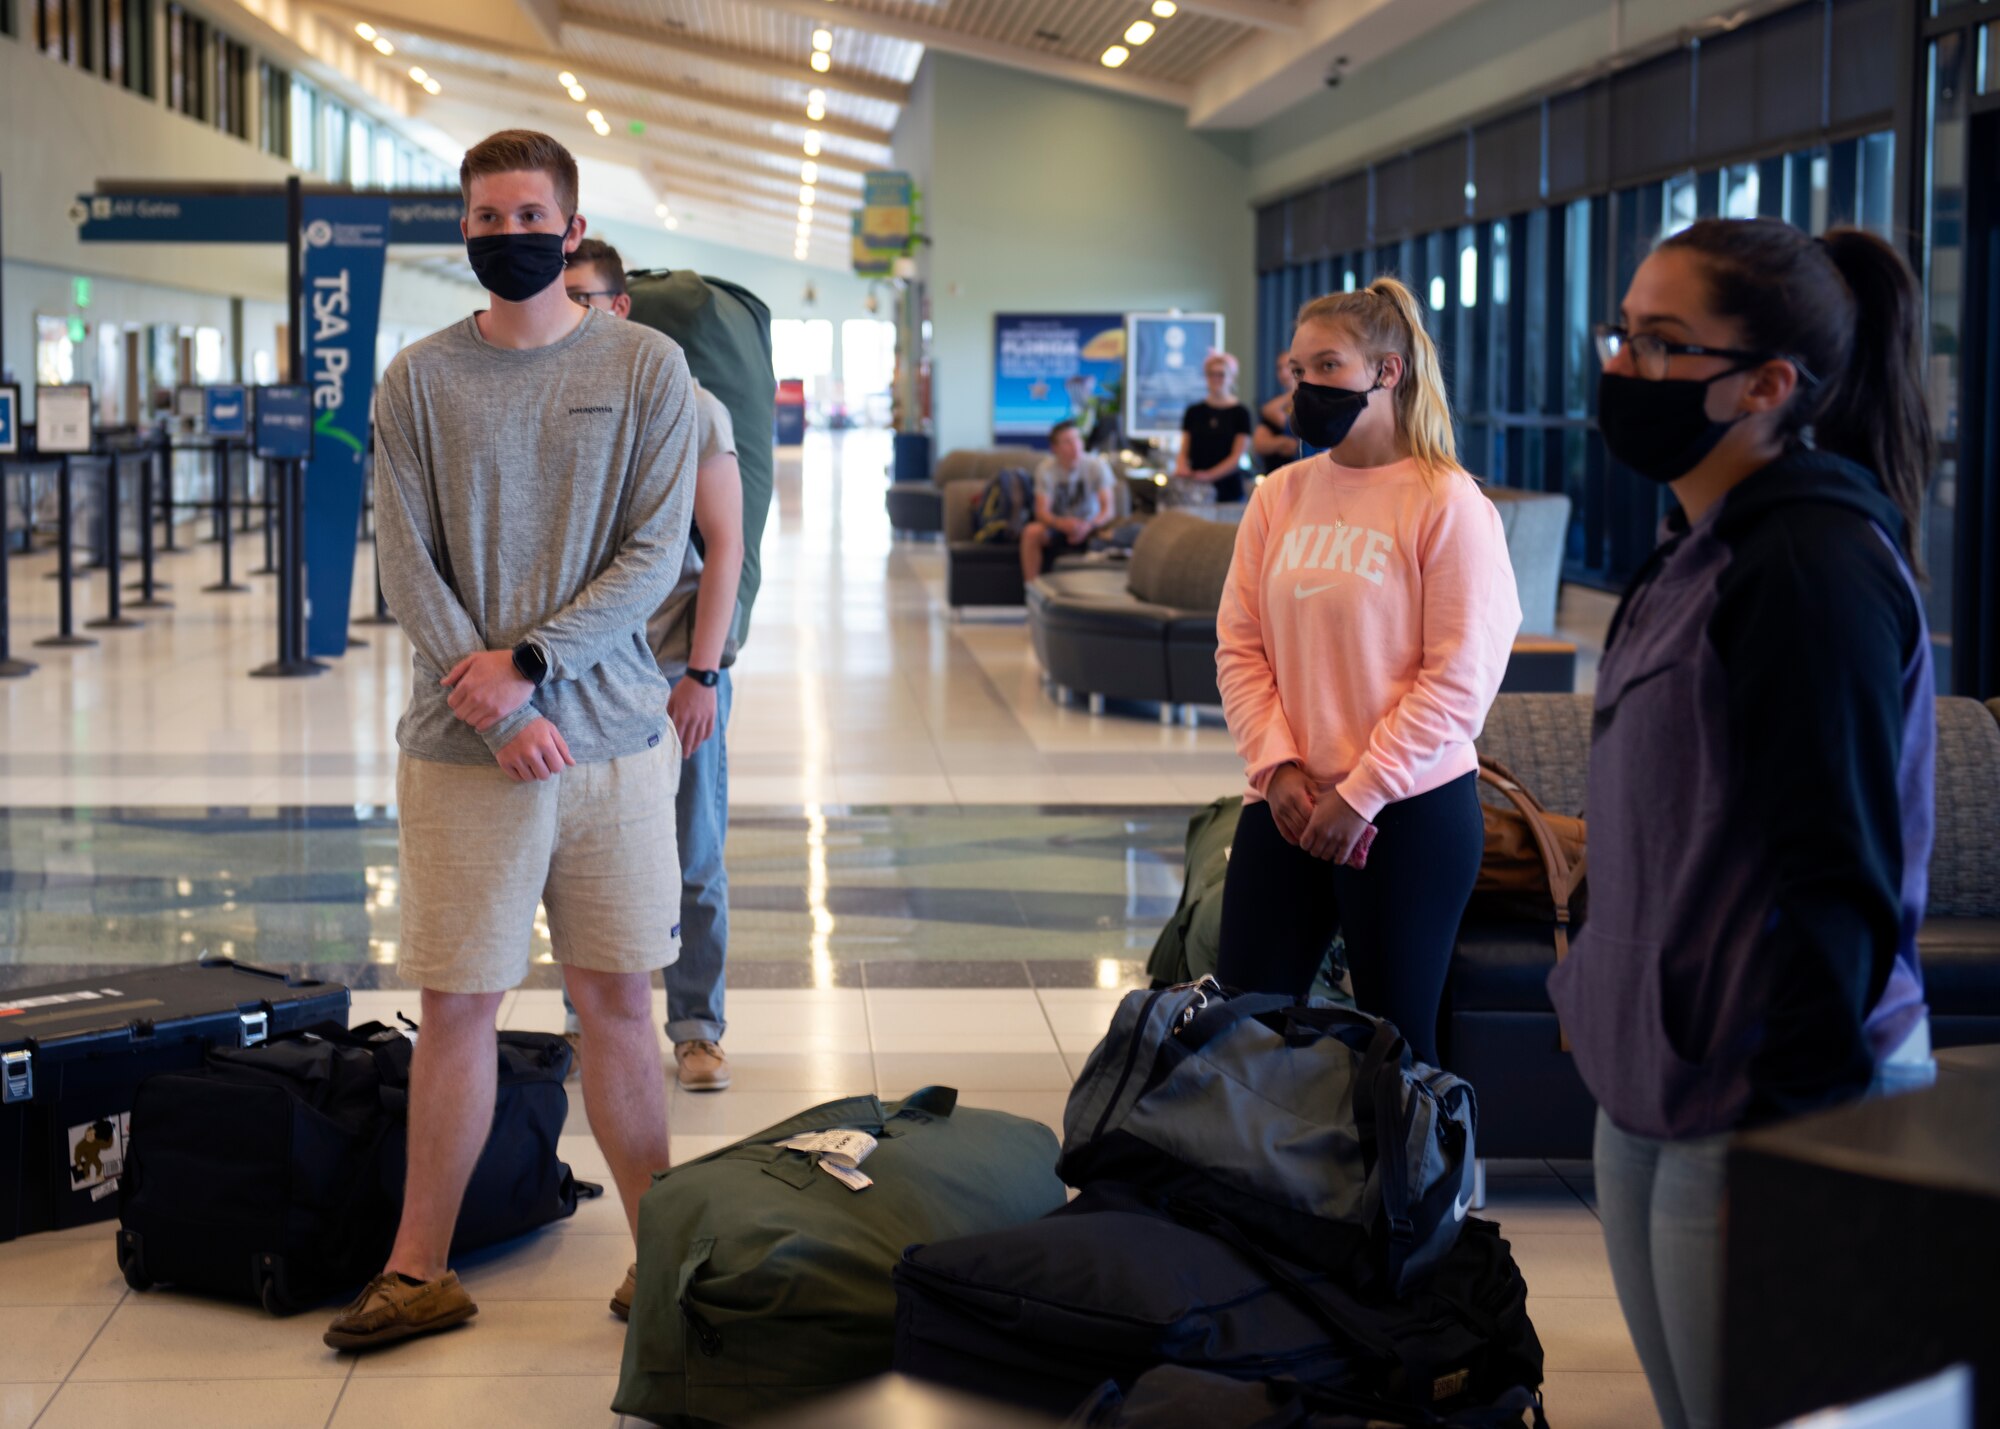 Airmen prepare to depart the Northwest Florida Beaches International Airport in Panama City, Florida, May 5, 2020. Technical training graduates arriving to Tyndall Air Force base follow additional guidelines due to the COVID-19 Pandemic. (U.S. Air Force photo by Brad Sturk)